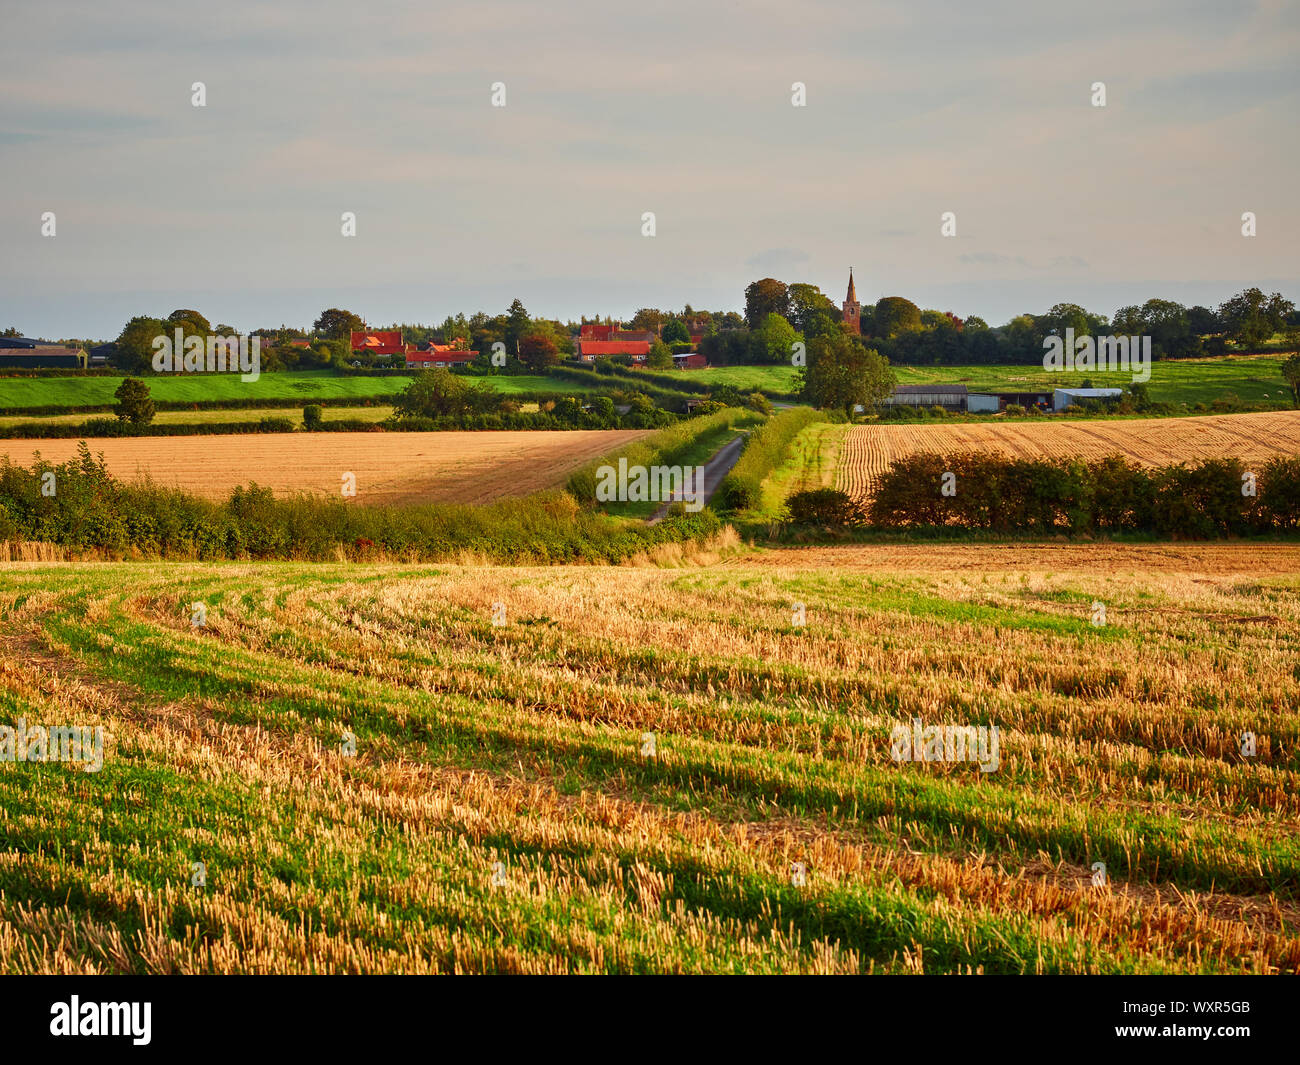 A view across the rural countryside landscape looking towards Kelby, Lincolnshire, illuminated by the warm glow of the evening sun Stock Photo